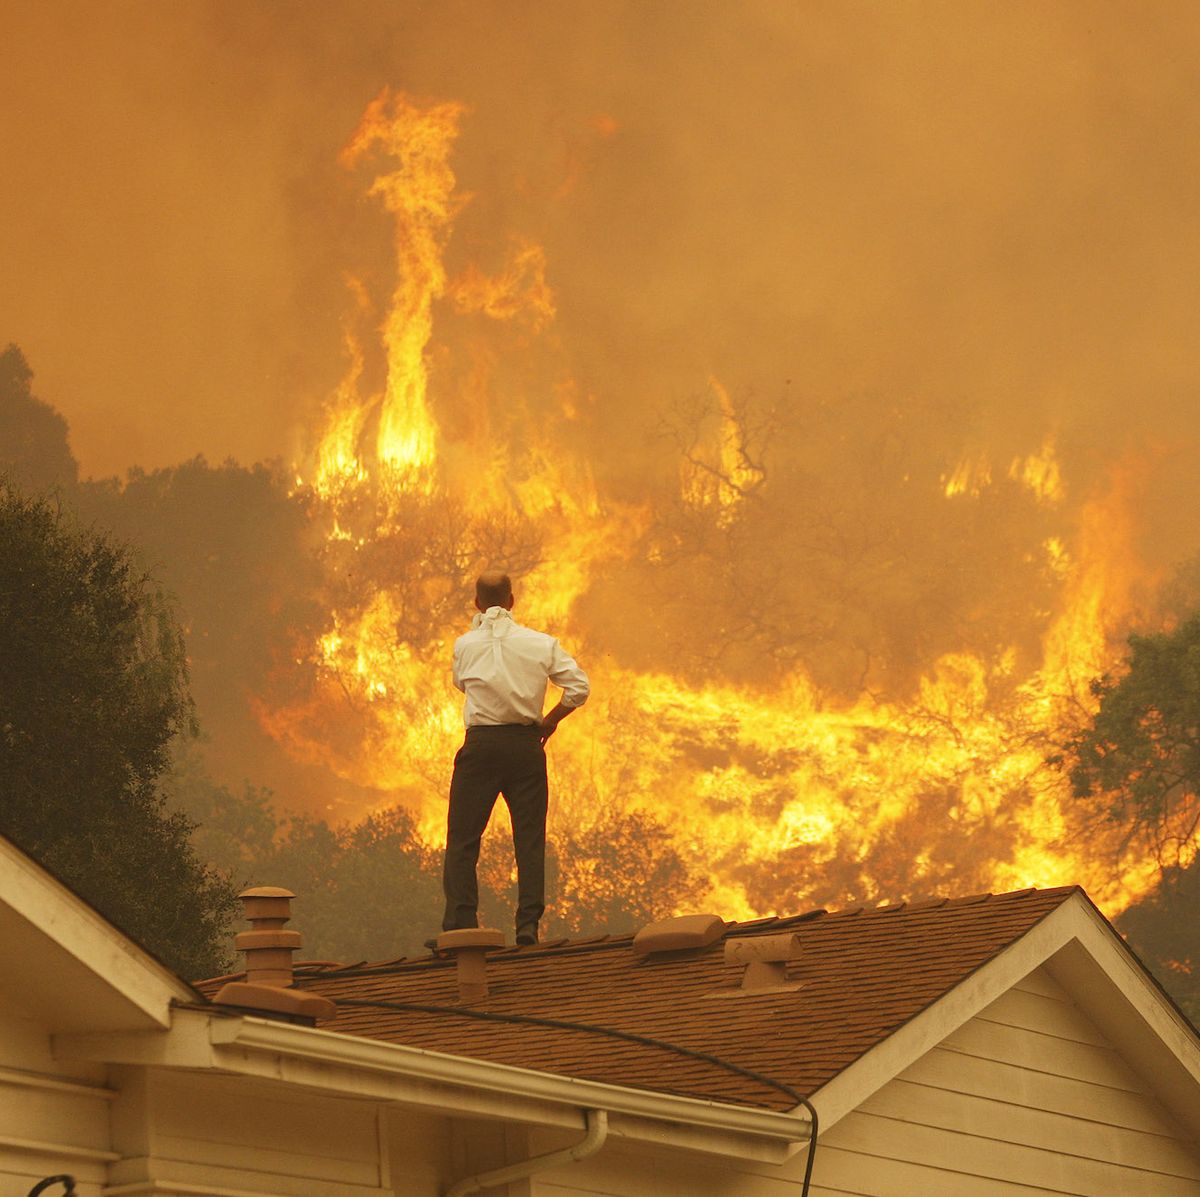 Springs Fire In Southern California Gains Strength, Continues To Threaten Homes